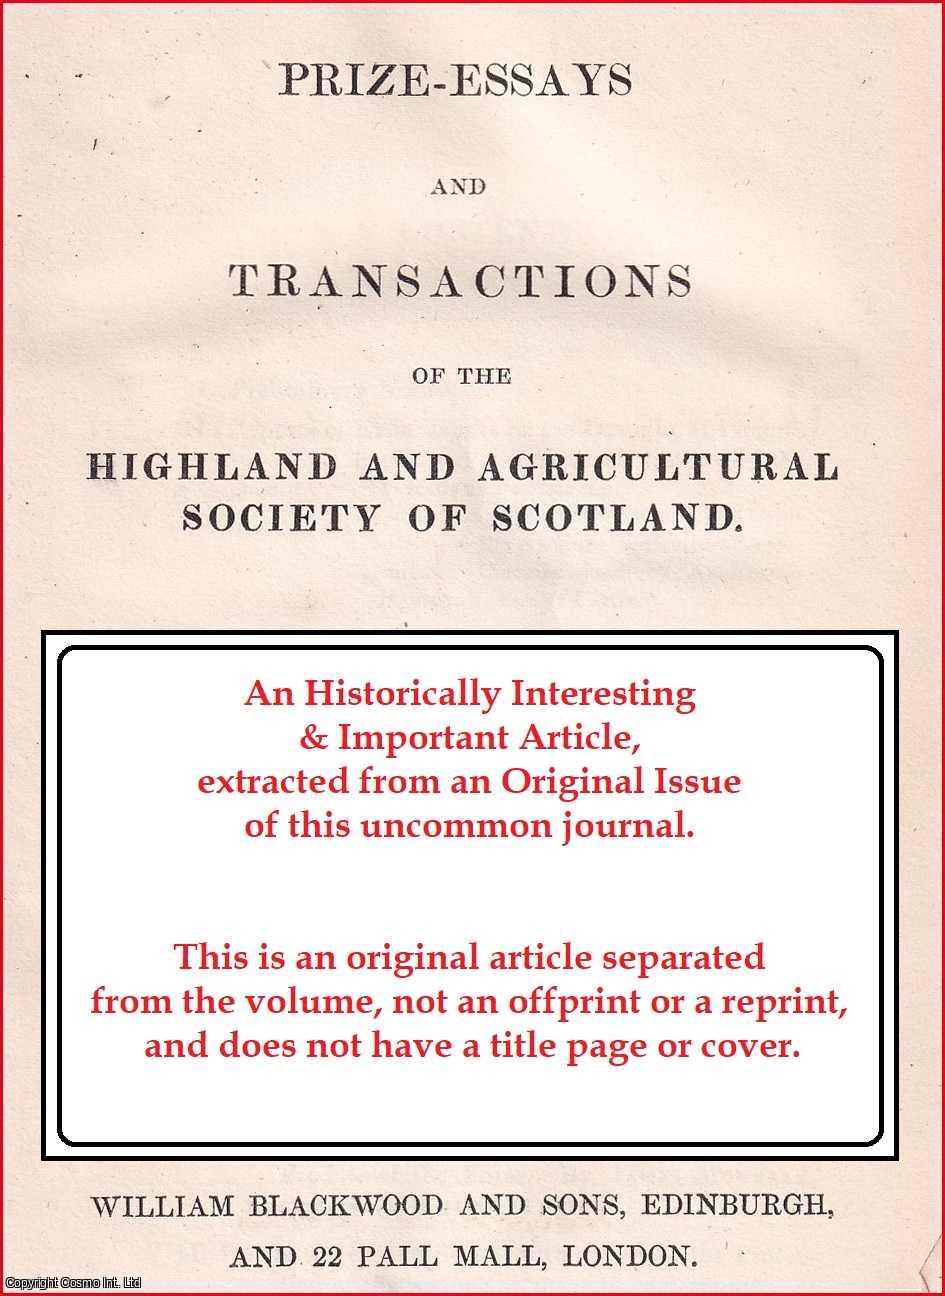 Professor Johnston of the Durham University. - The Improvement of Oats Growing on Moss. An uncommon original article from the Prize Essays and Transactions of the Highland Society of Scotland, 1843.